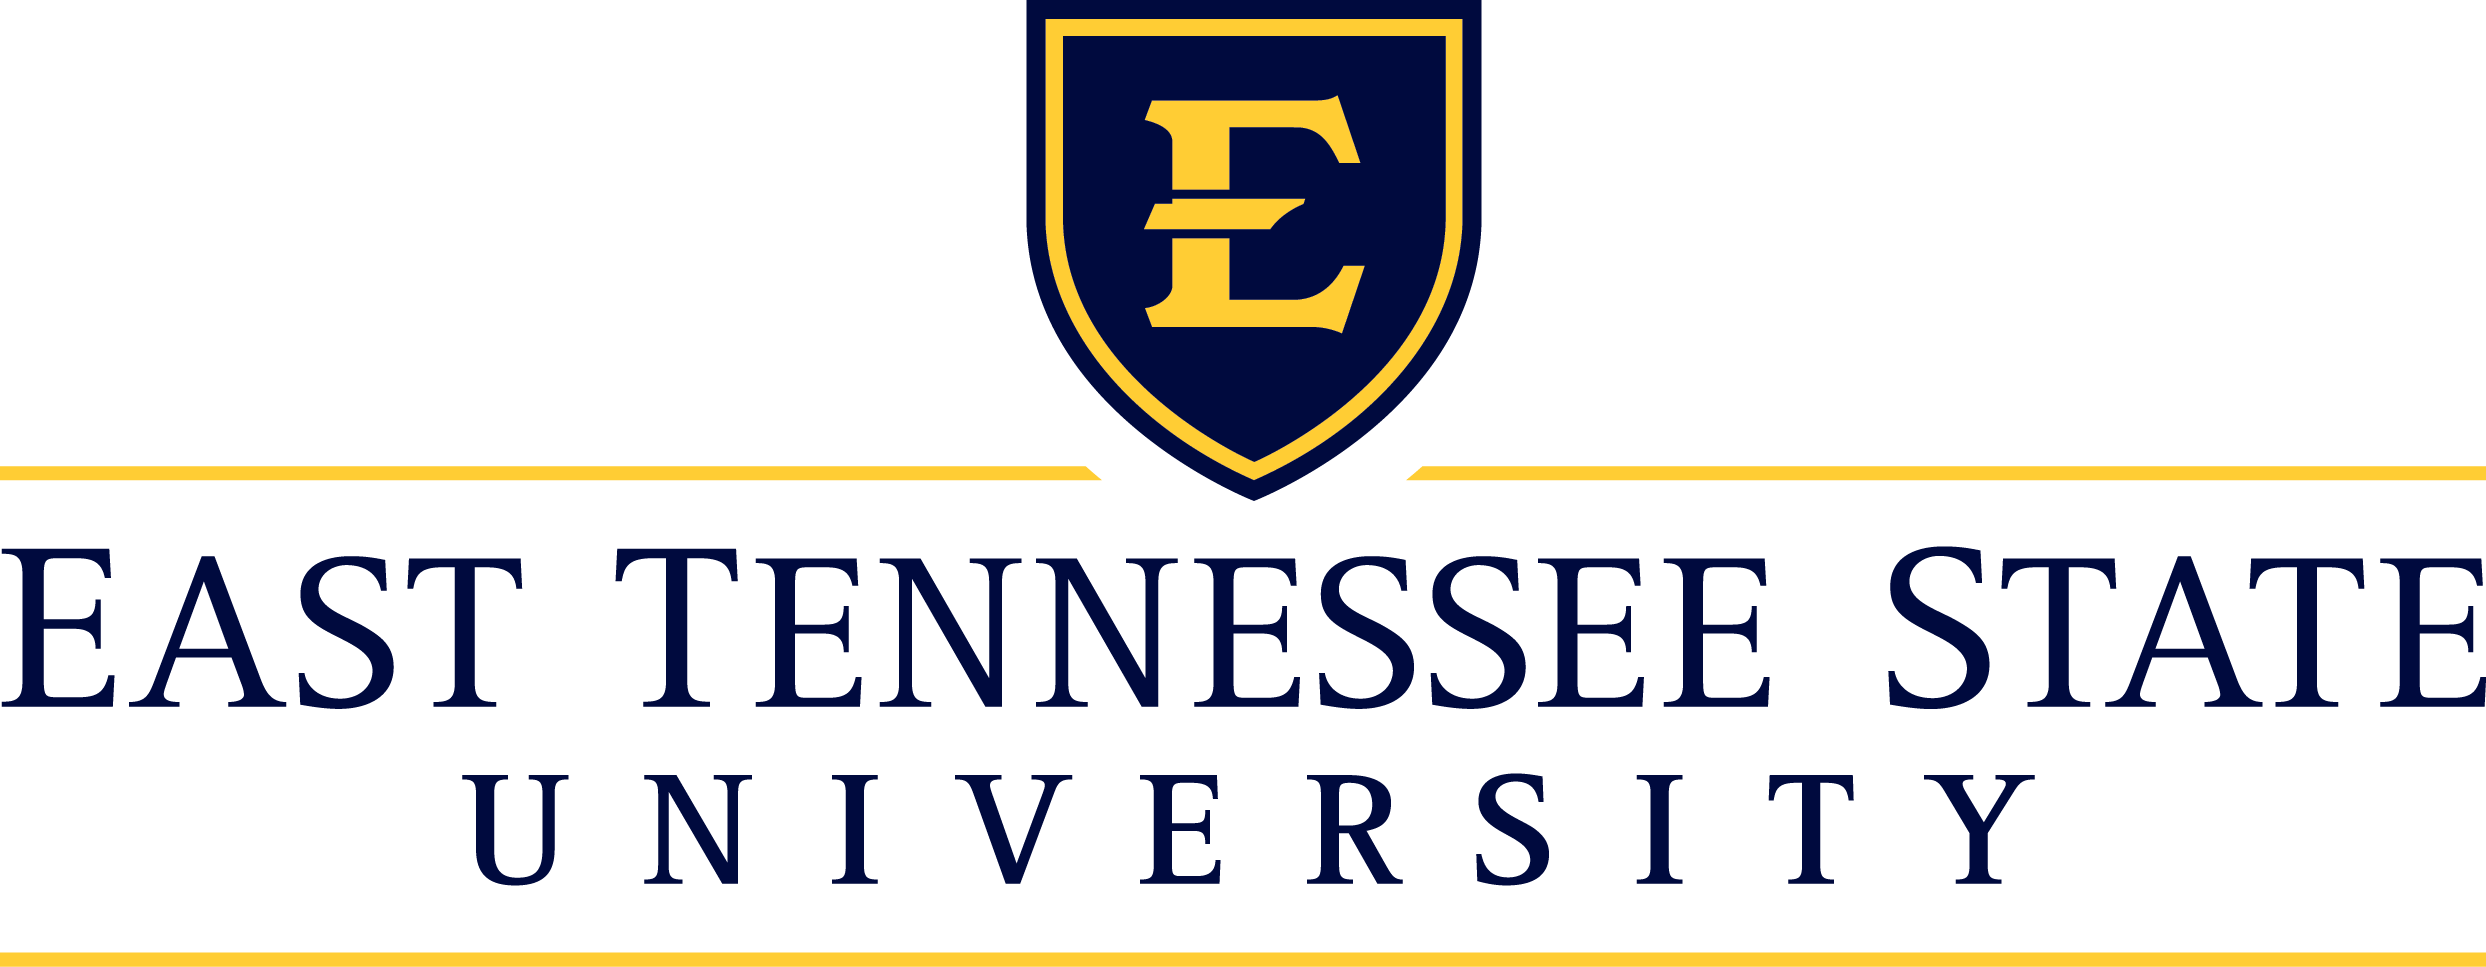 East Tennessee State University - Degree Programs, Tuition, Financial Aid